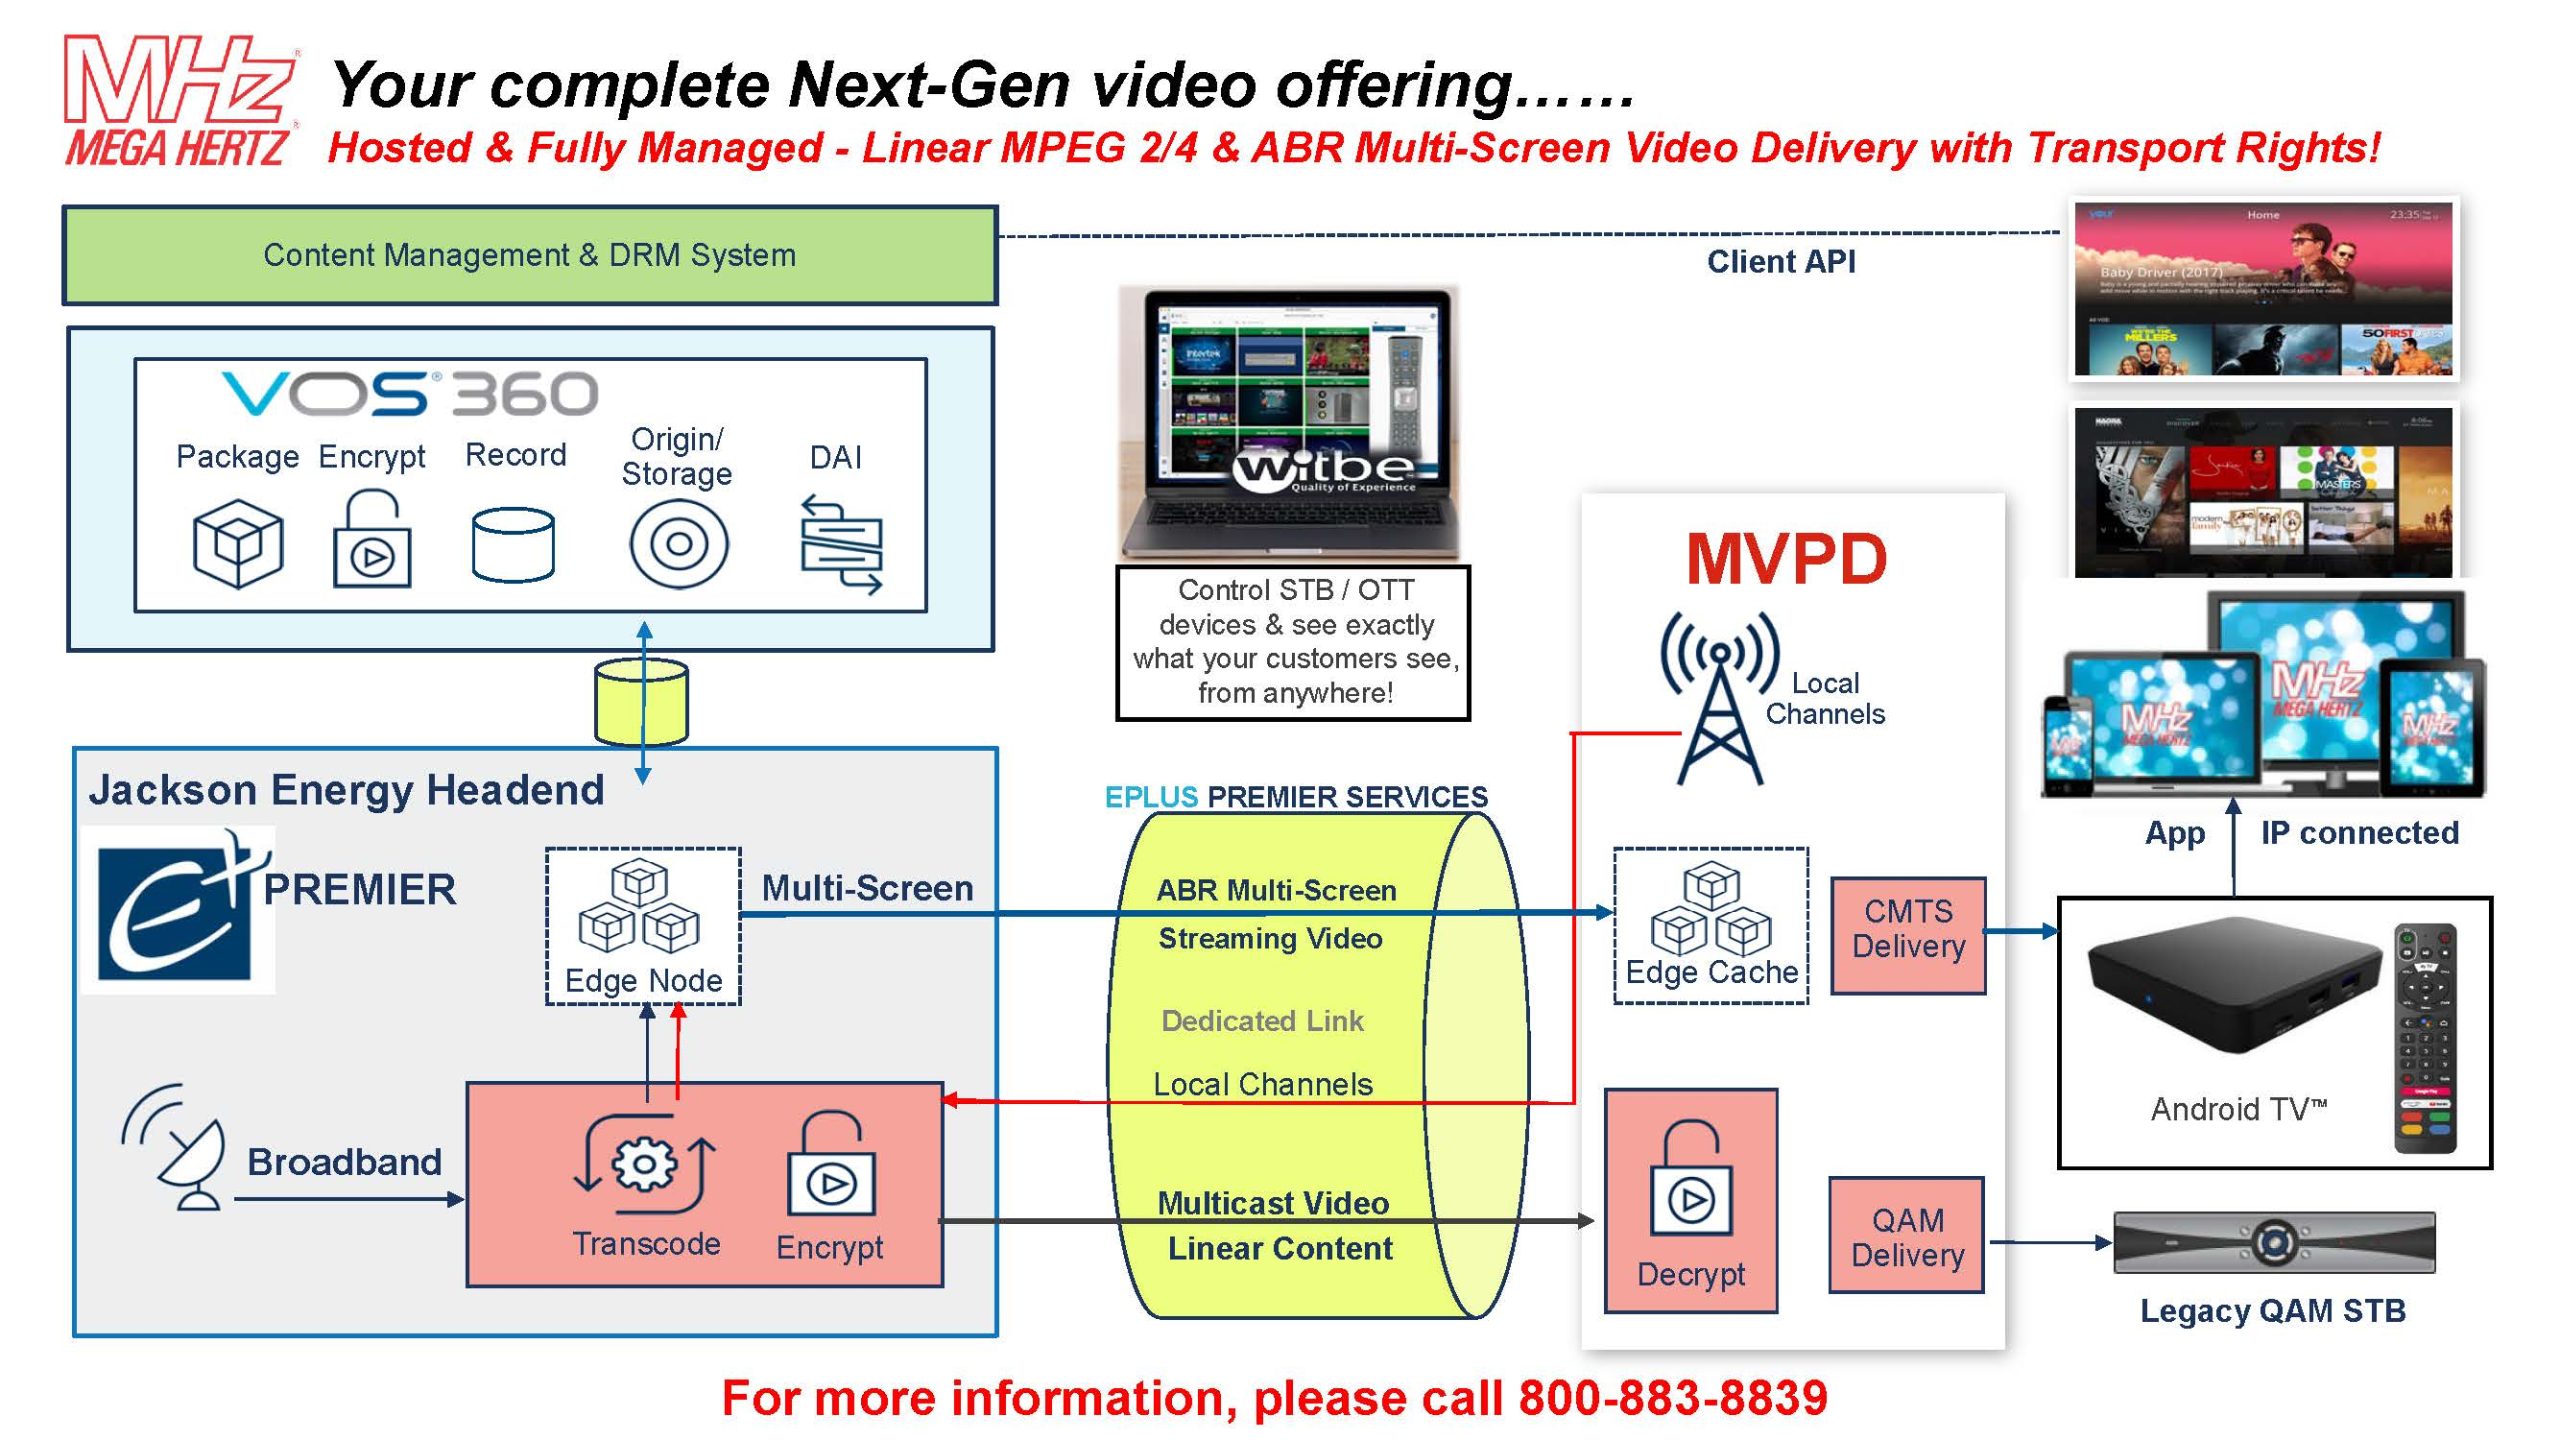 MHz and EPlus Premier have partnered to offer Multi-channel Video Programming Distributors a “unique” IP video headend management service with a pay-as-you-grow model. Now MVPD’s can launch new “multi-screen” services, as well as, replace or retire legacy HITS, IPTV or QAM based MPEG 2/4 linear feeds.